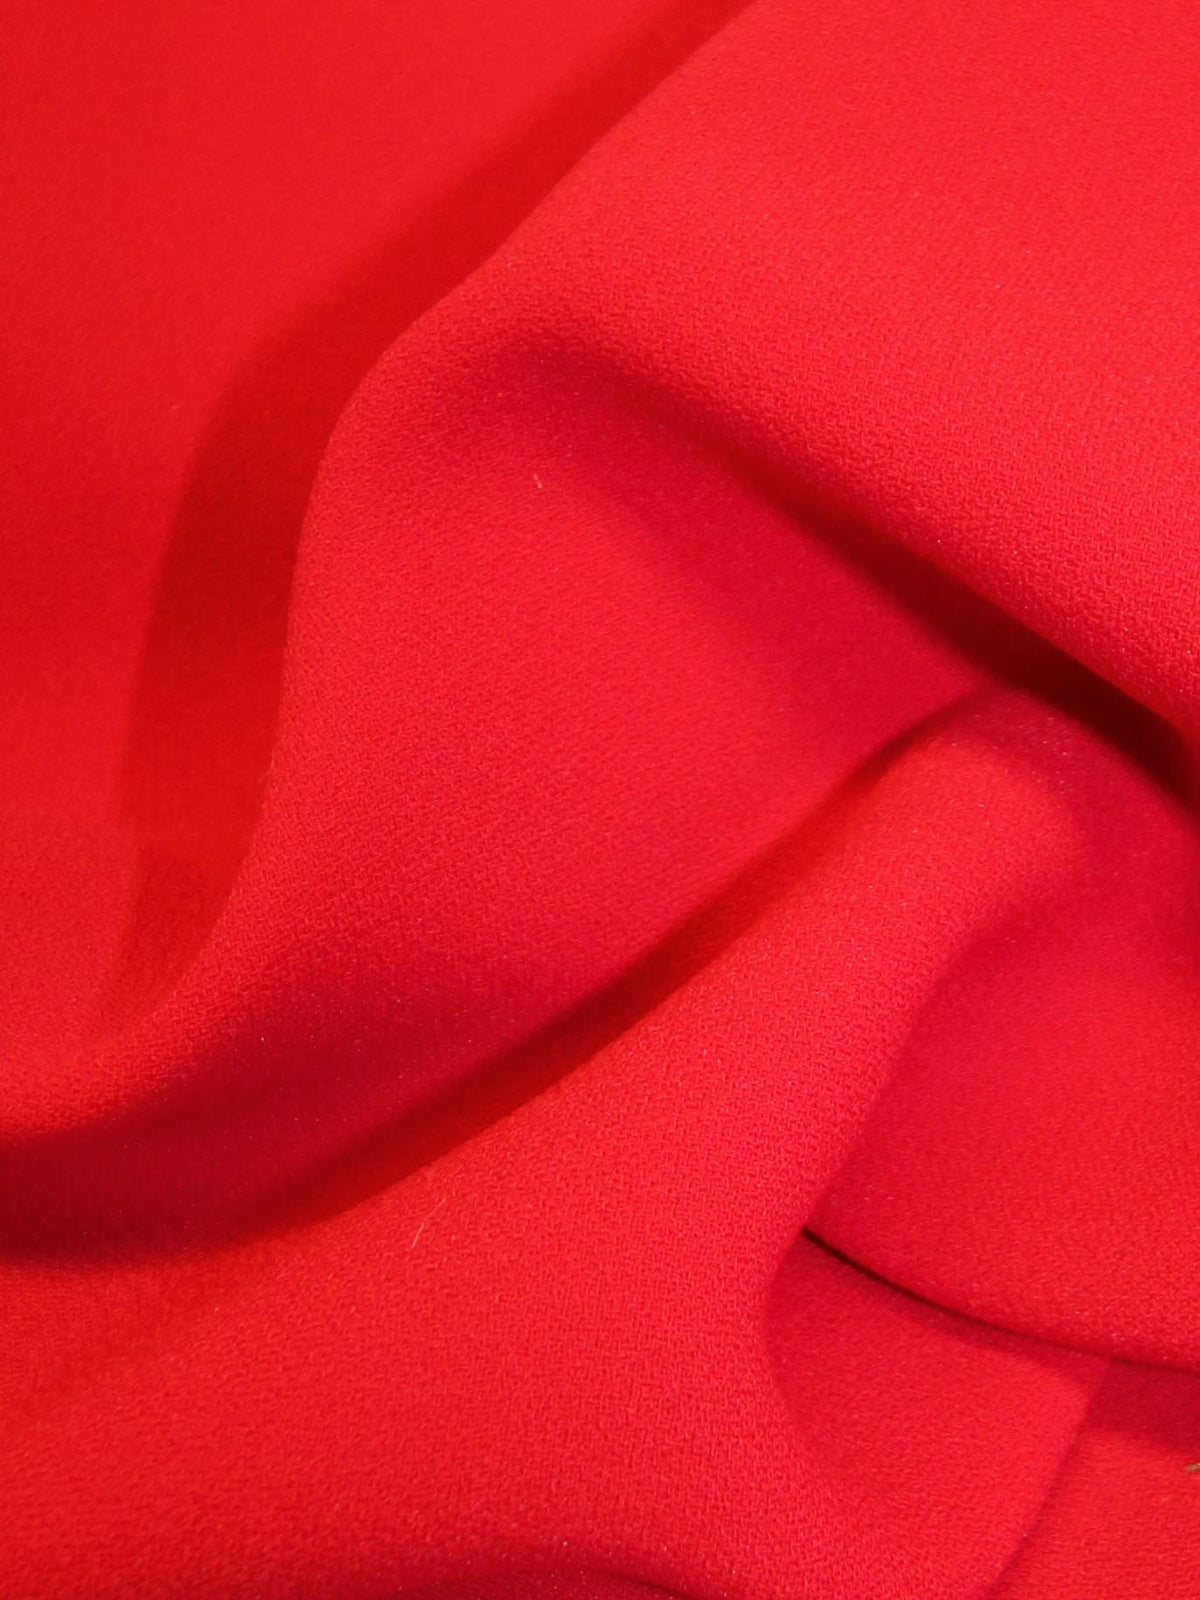 Red Polyester Crepe - Curiosity